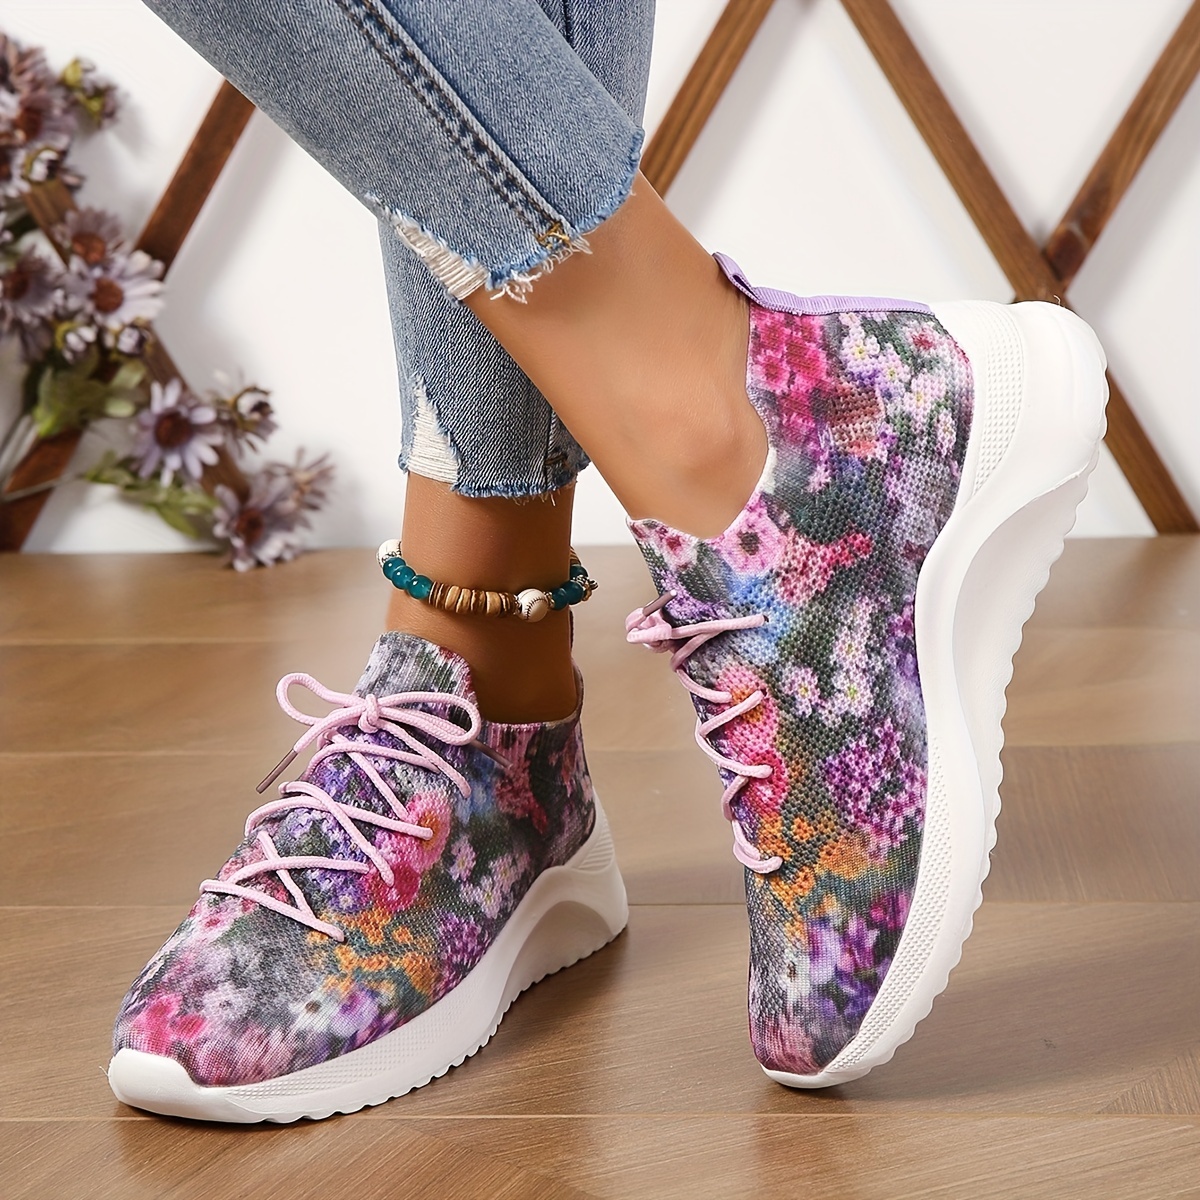 Women's Fashionable And Versatile Floral Print Fabric Spring/summer  Comfortable Green Flat Casual Sports Shoes